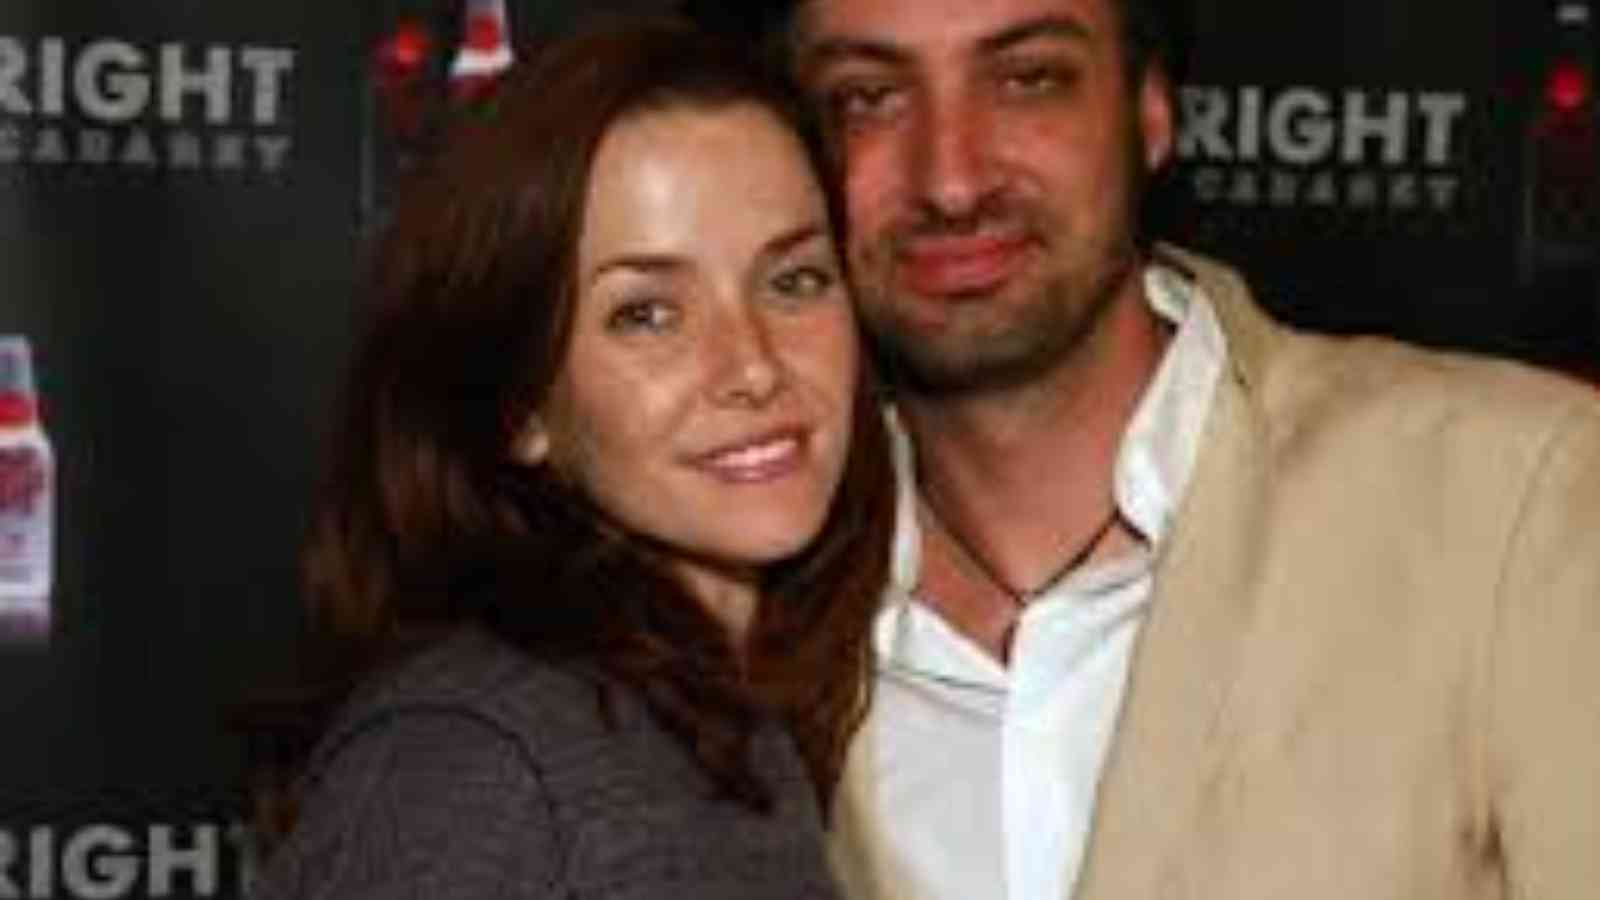 Who is Stephen Full? All about Annie Wersching's husband and their kids